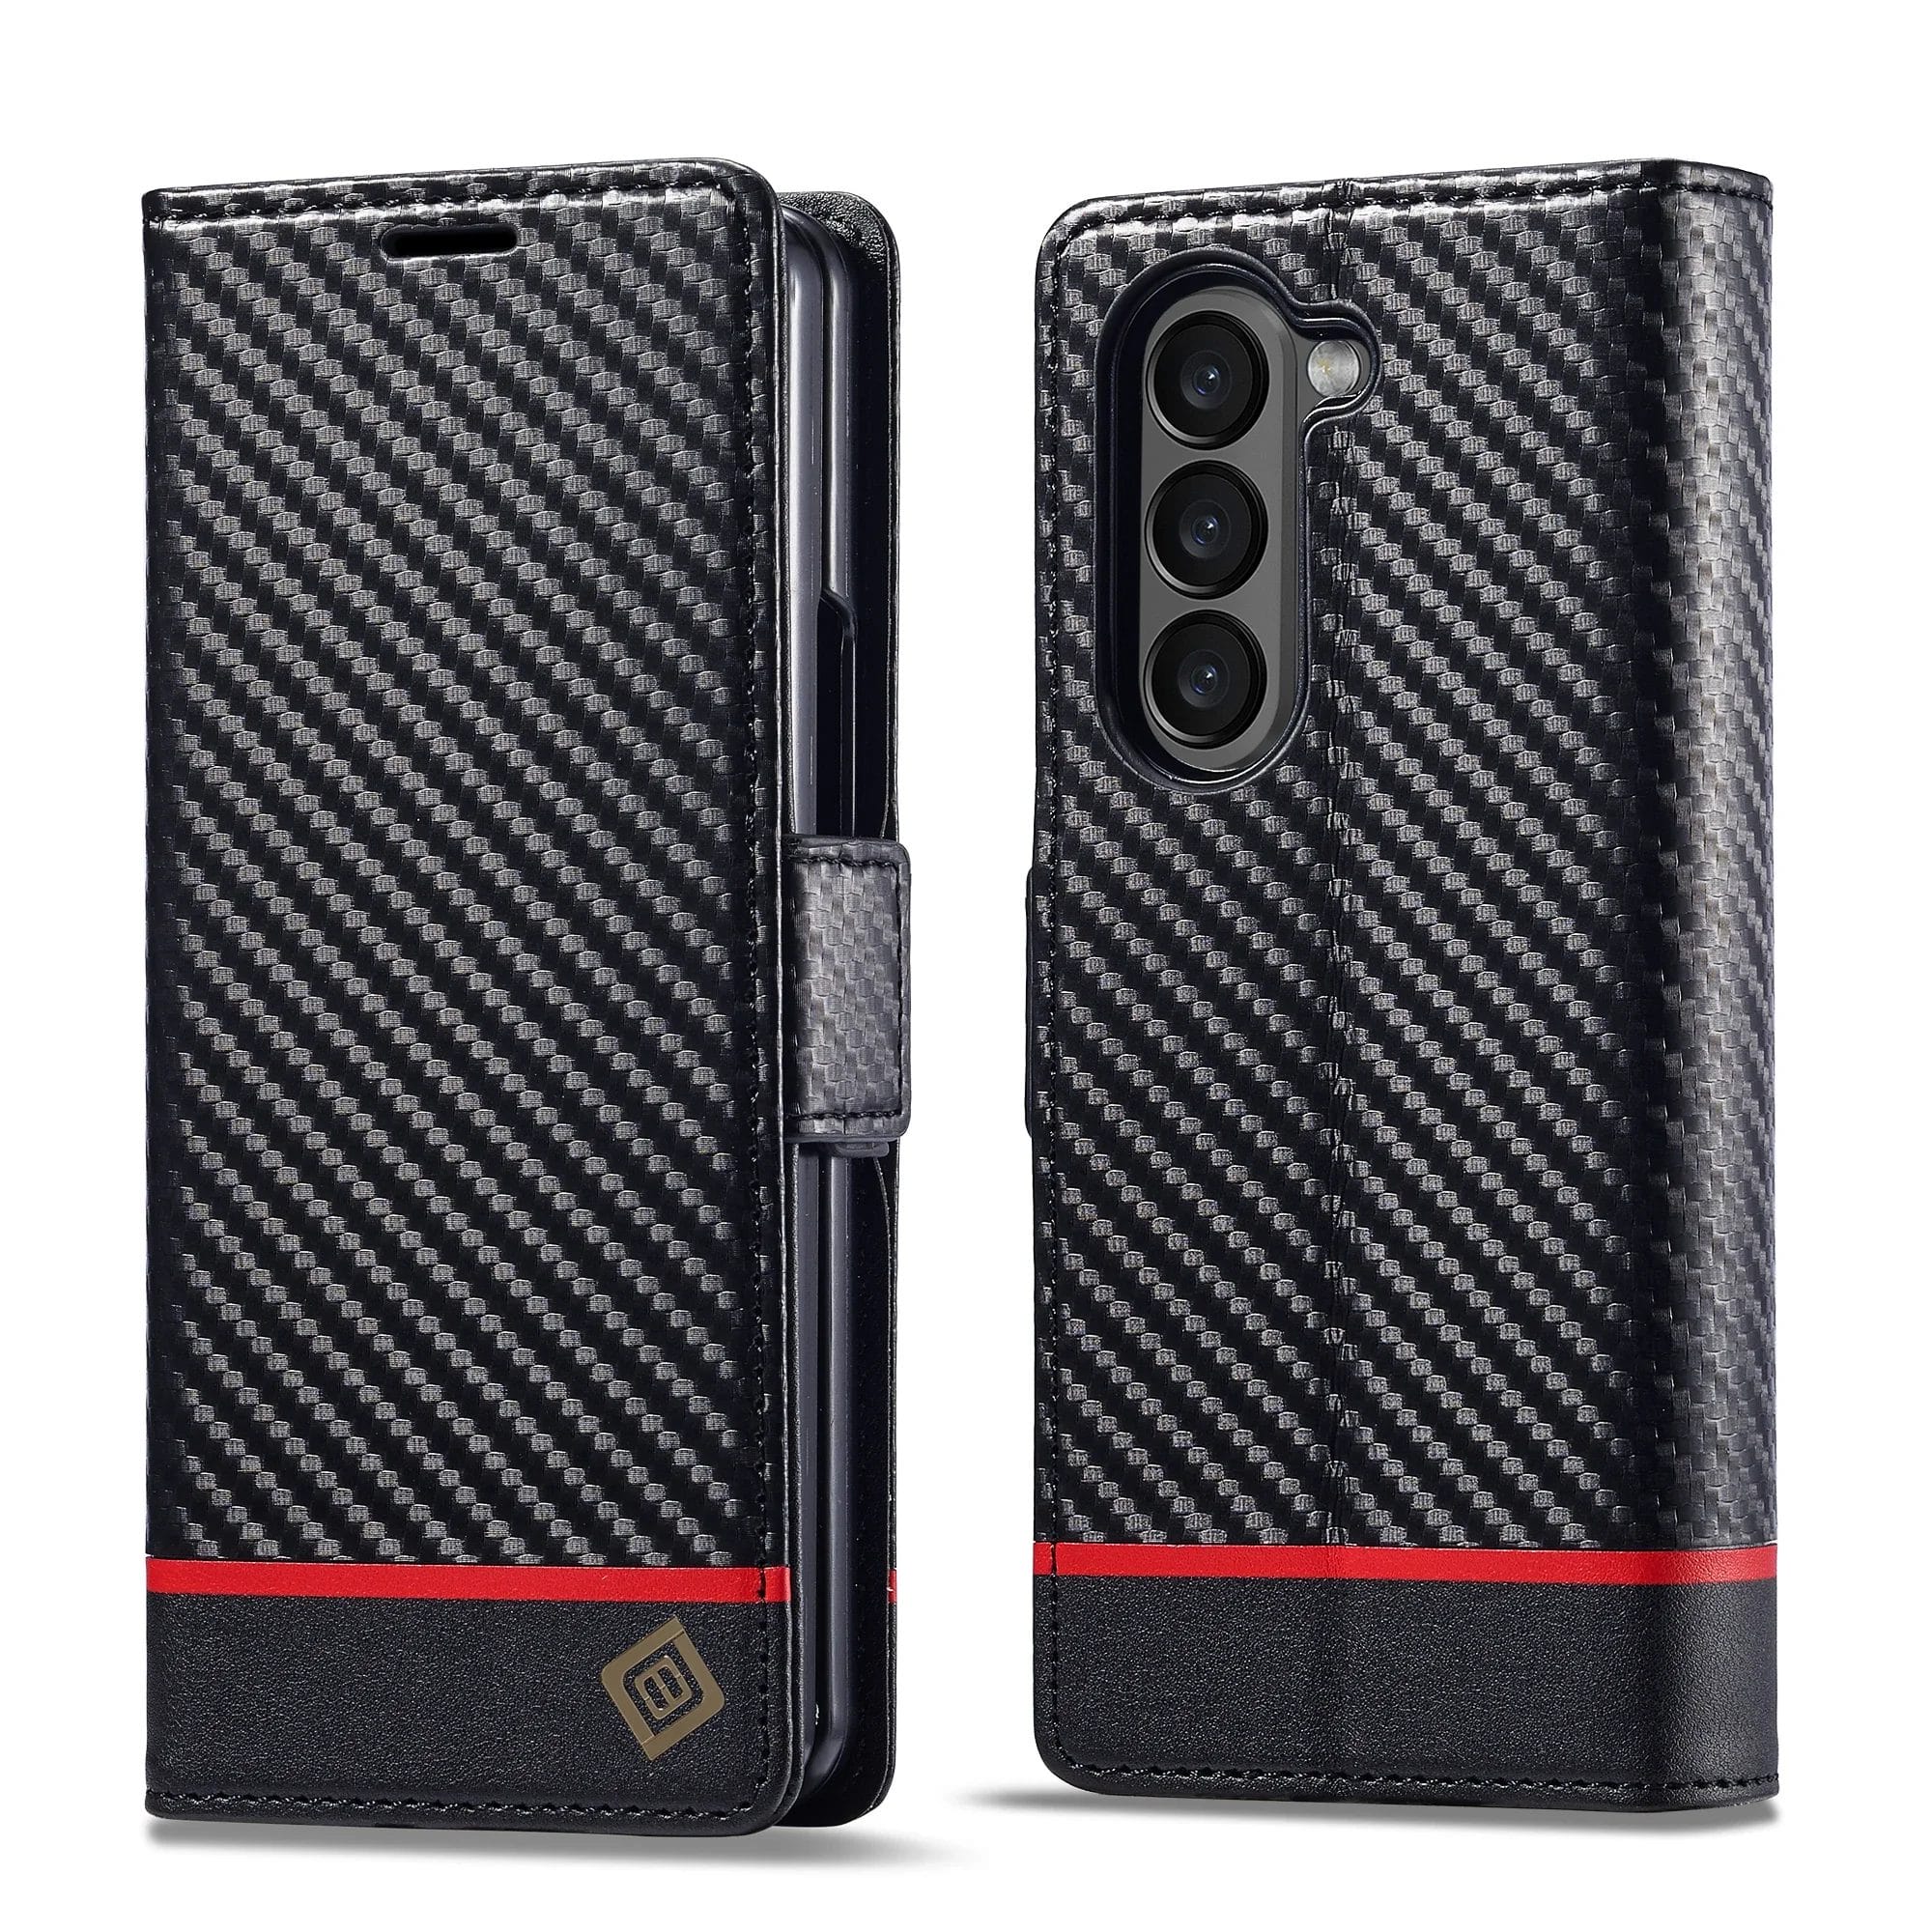 Luxury Carbon Fiber Leather Wallet Case For Samsung Galaxy Z Fold 1